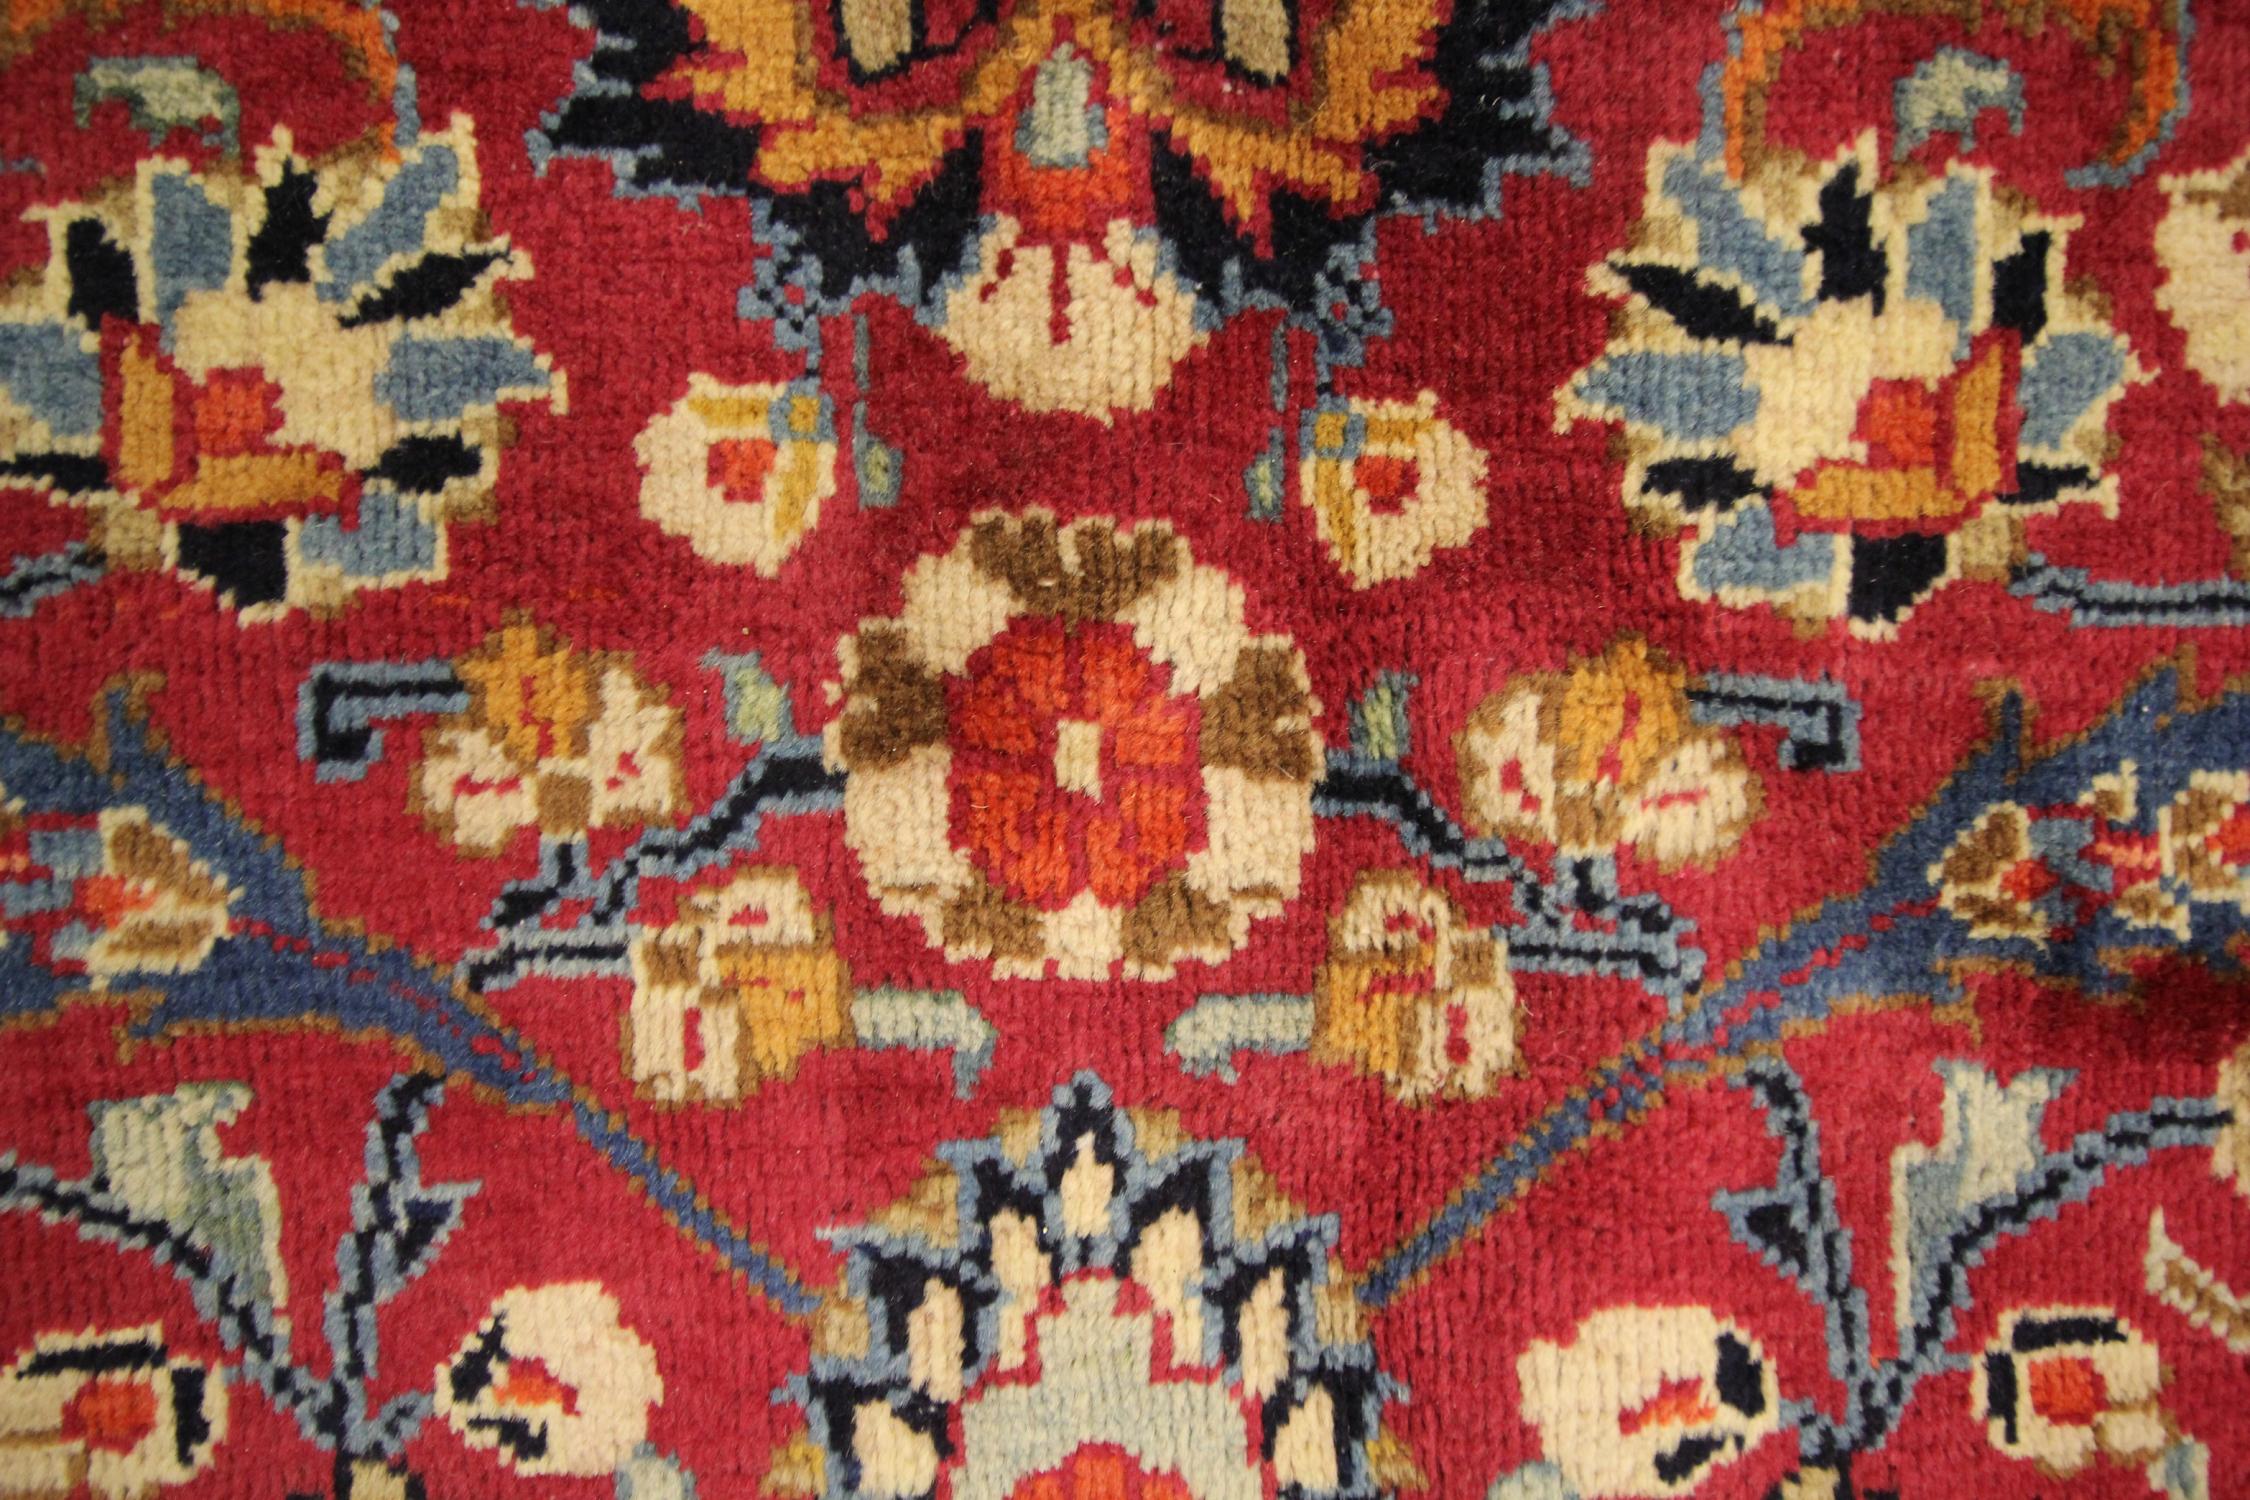 Antique Rugs Crimson Red Handmade Carpet, All over Turkish Rugs for Sale For Sale 8